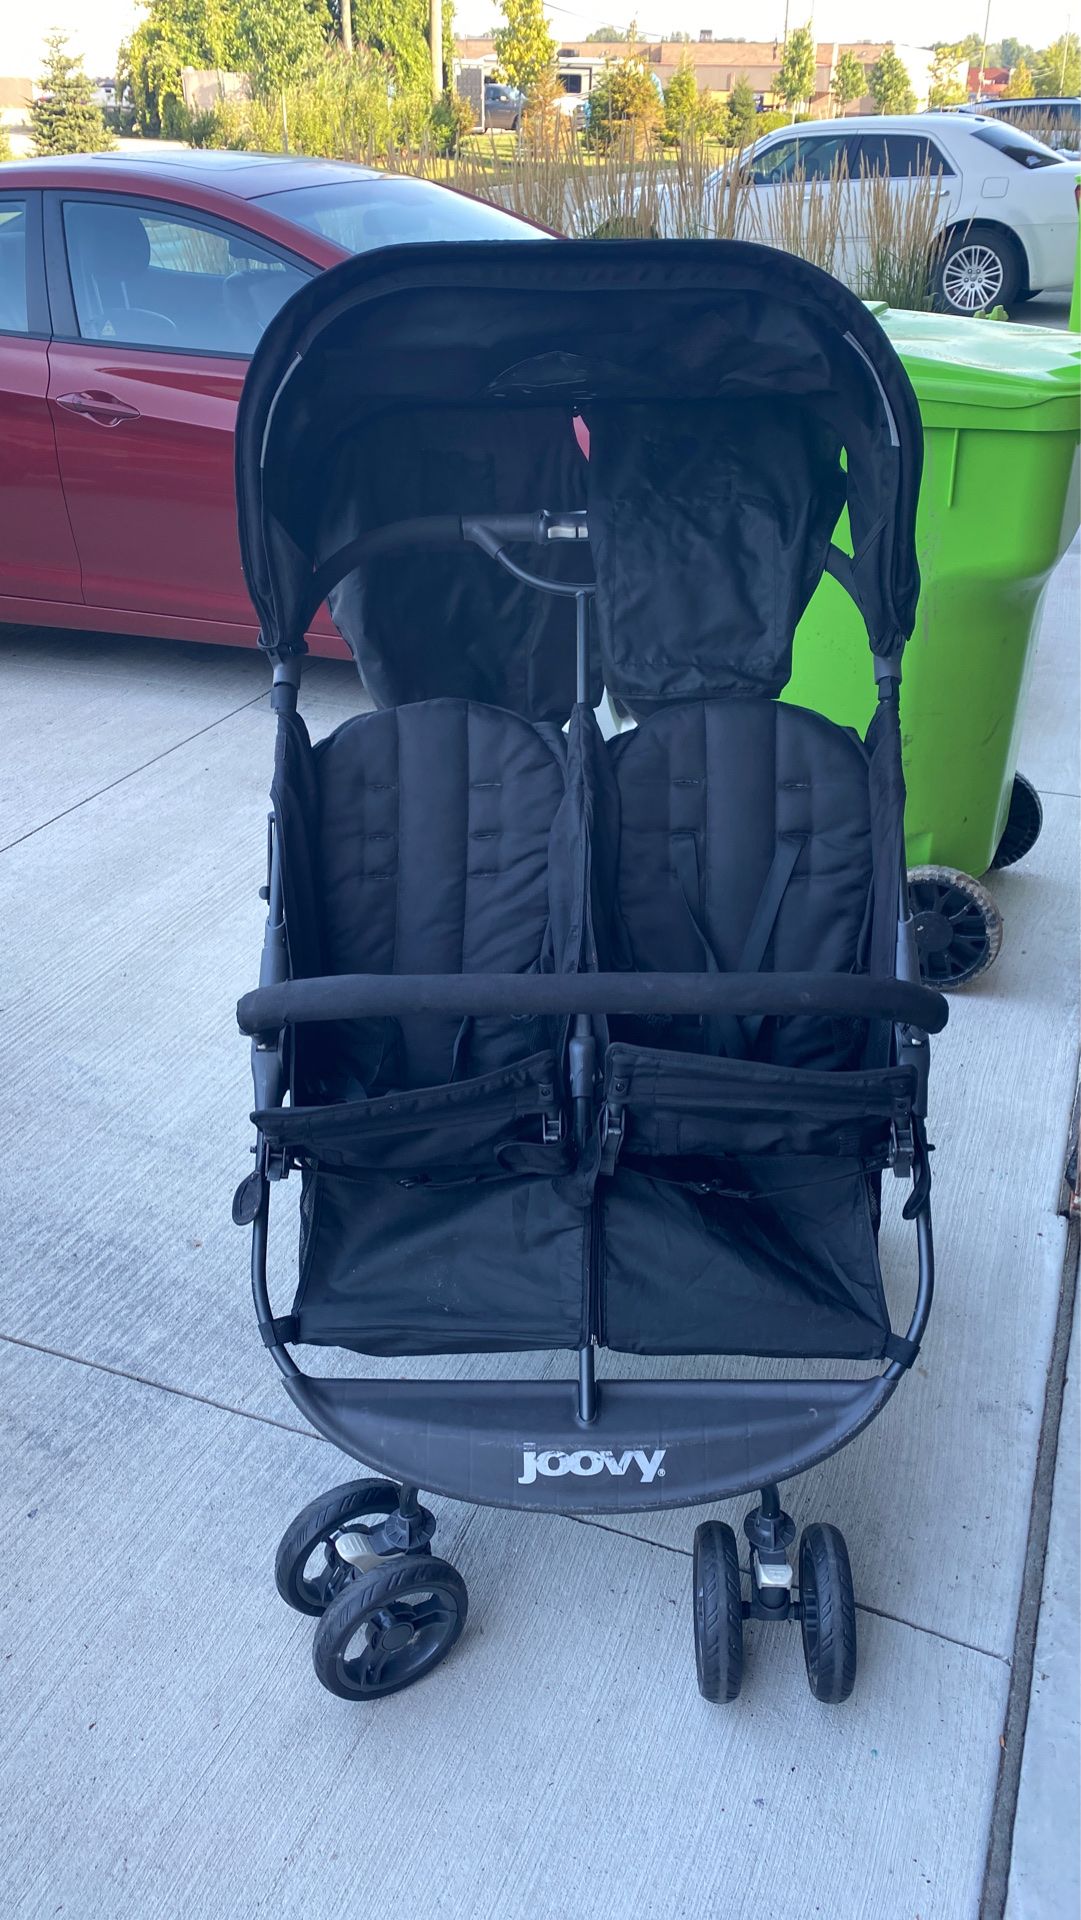 Joozy Double Stroller. Very clean and sanitized.